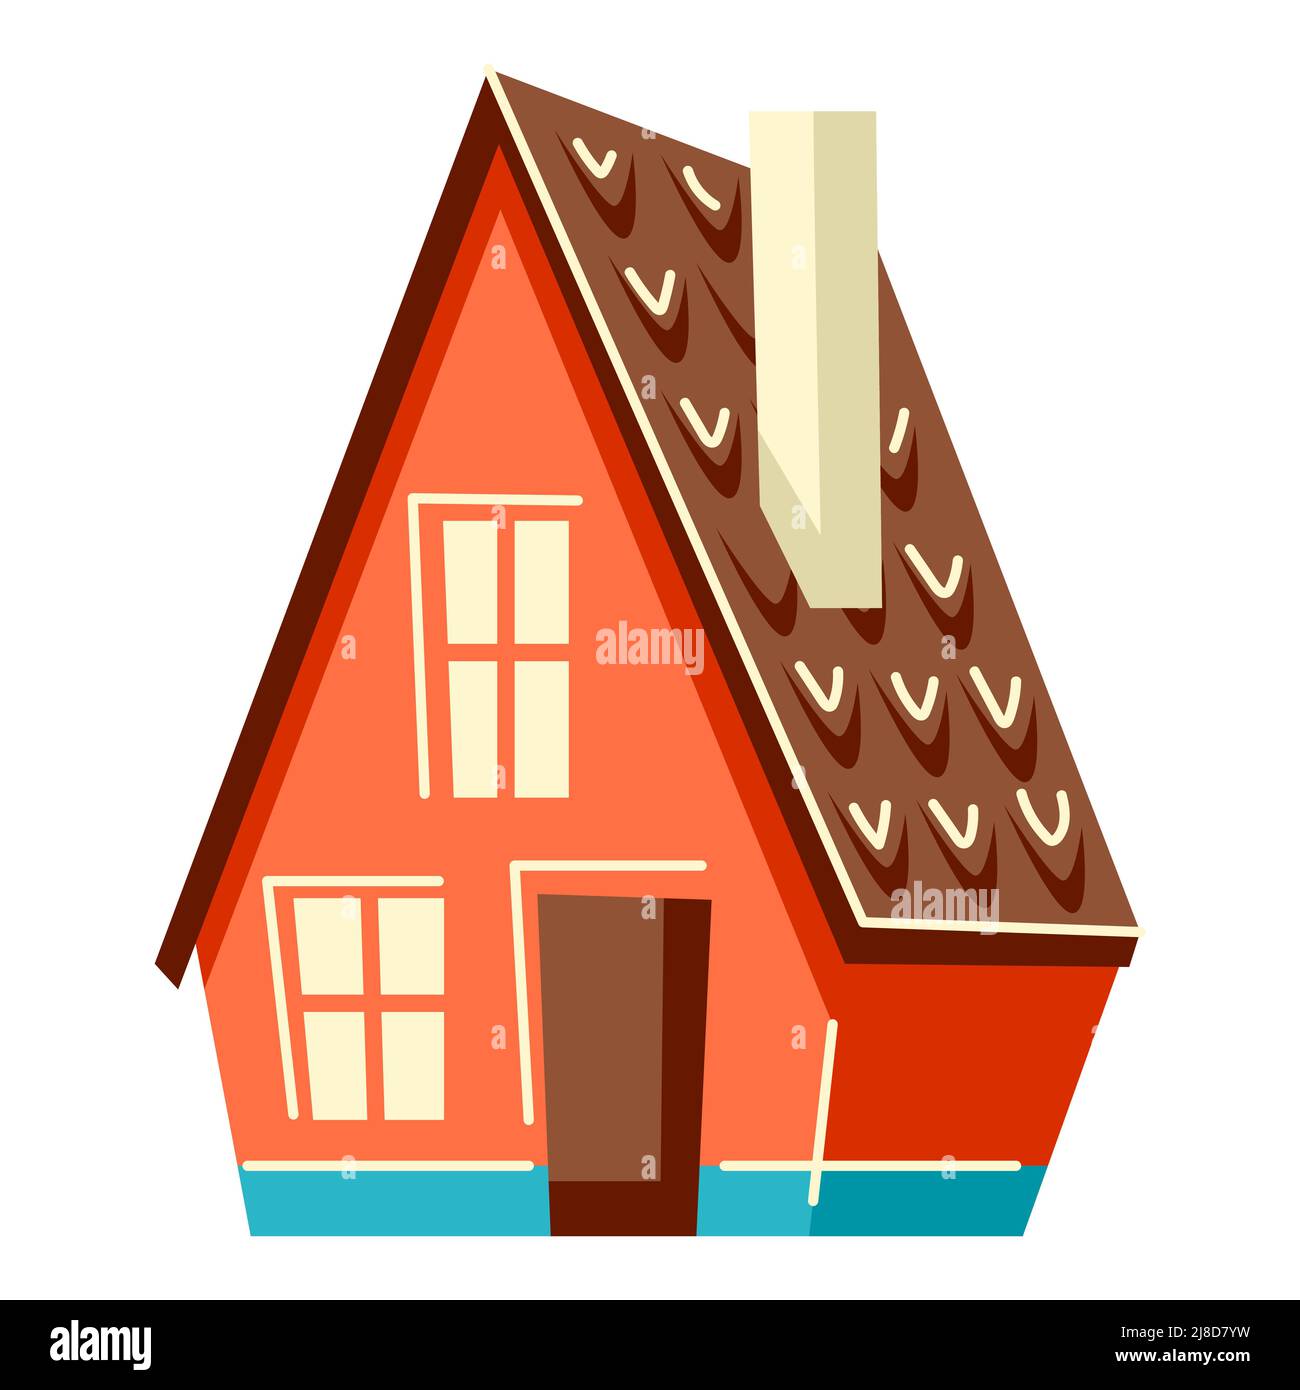 Illustration of cute house. Country colorful cottage image. Stock Vector